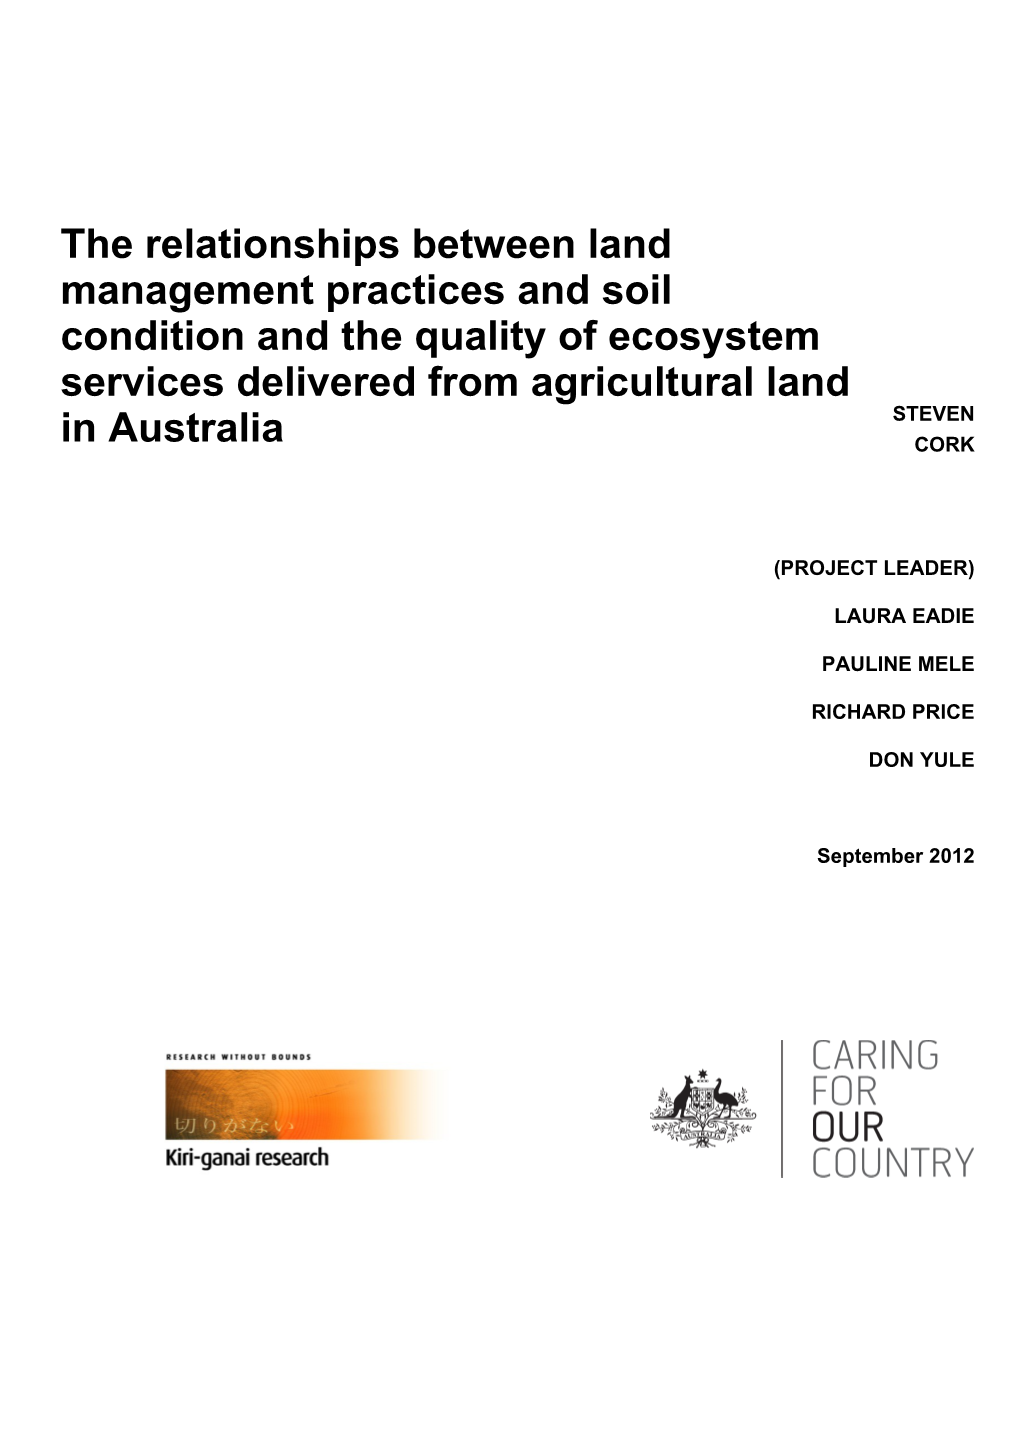 Relationships Between Land Management Practices and Soil Condition s1